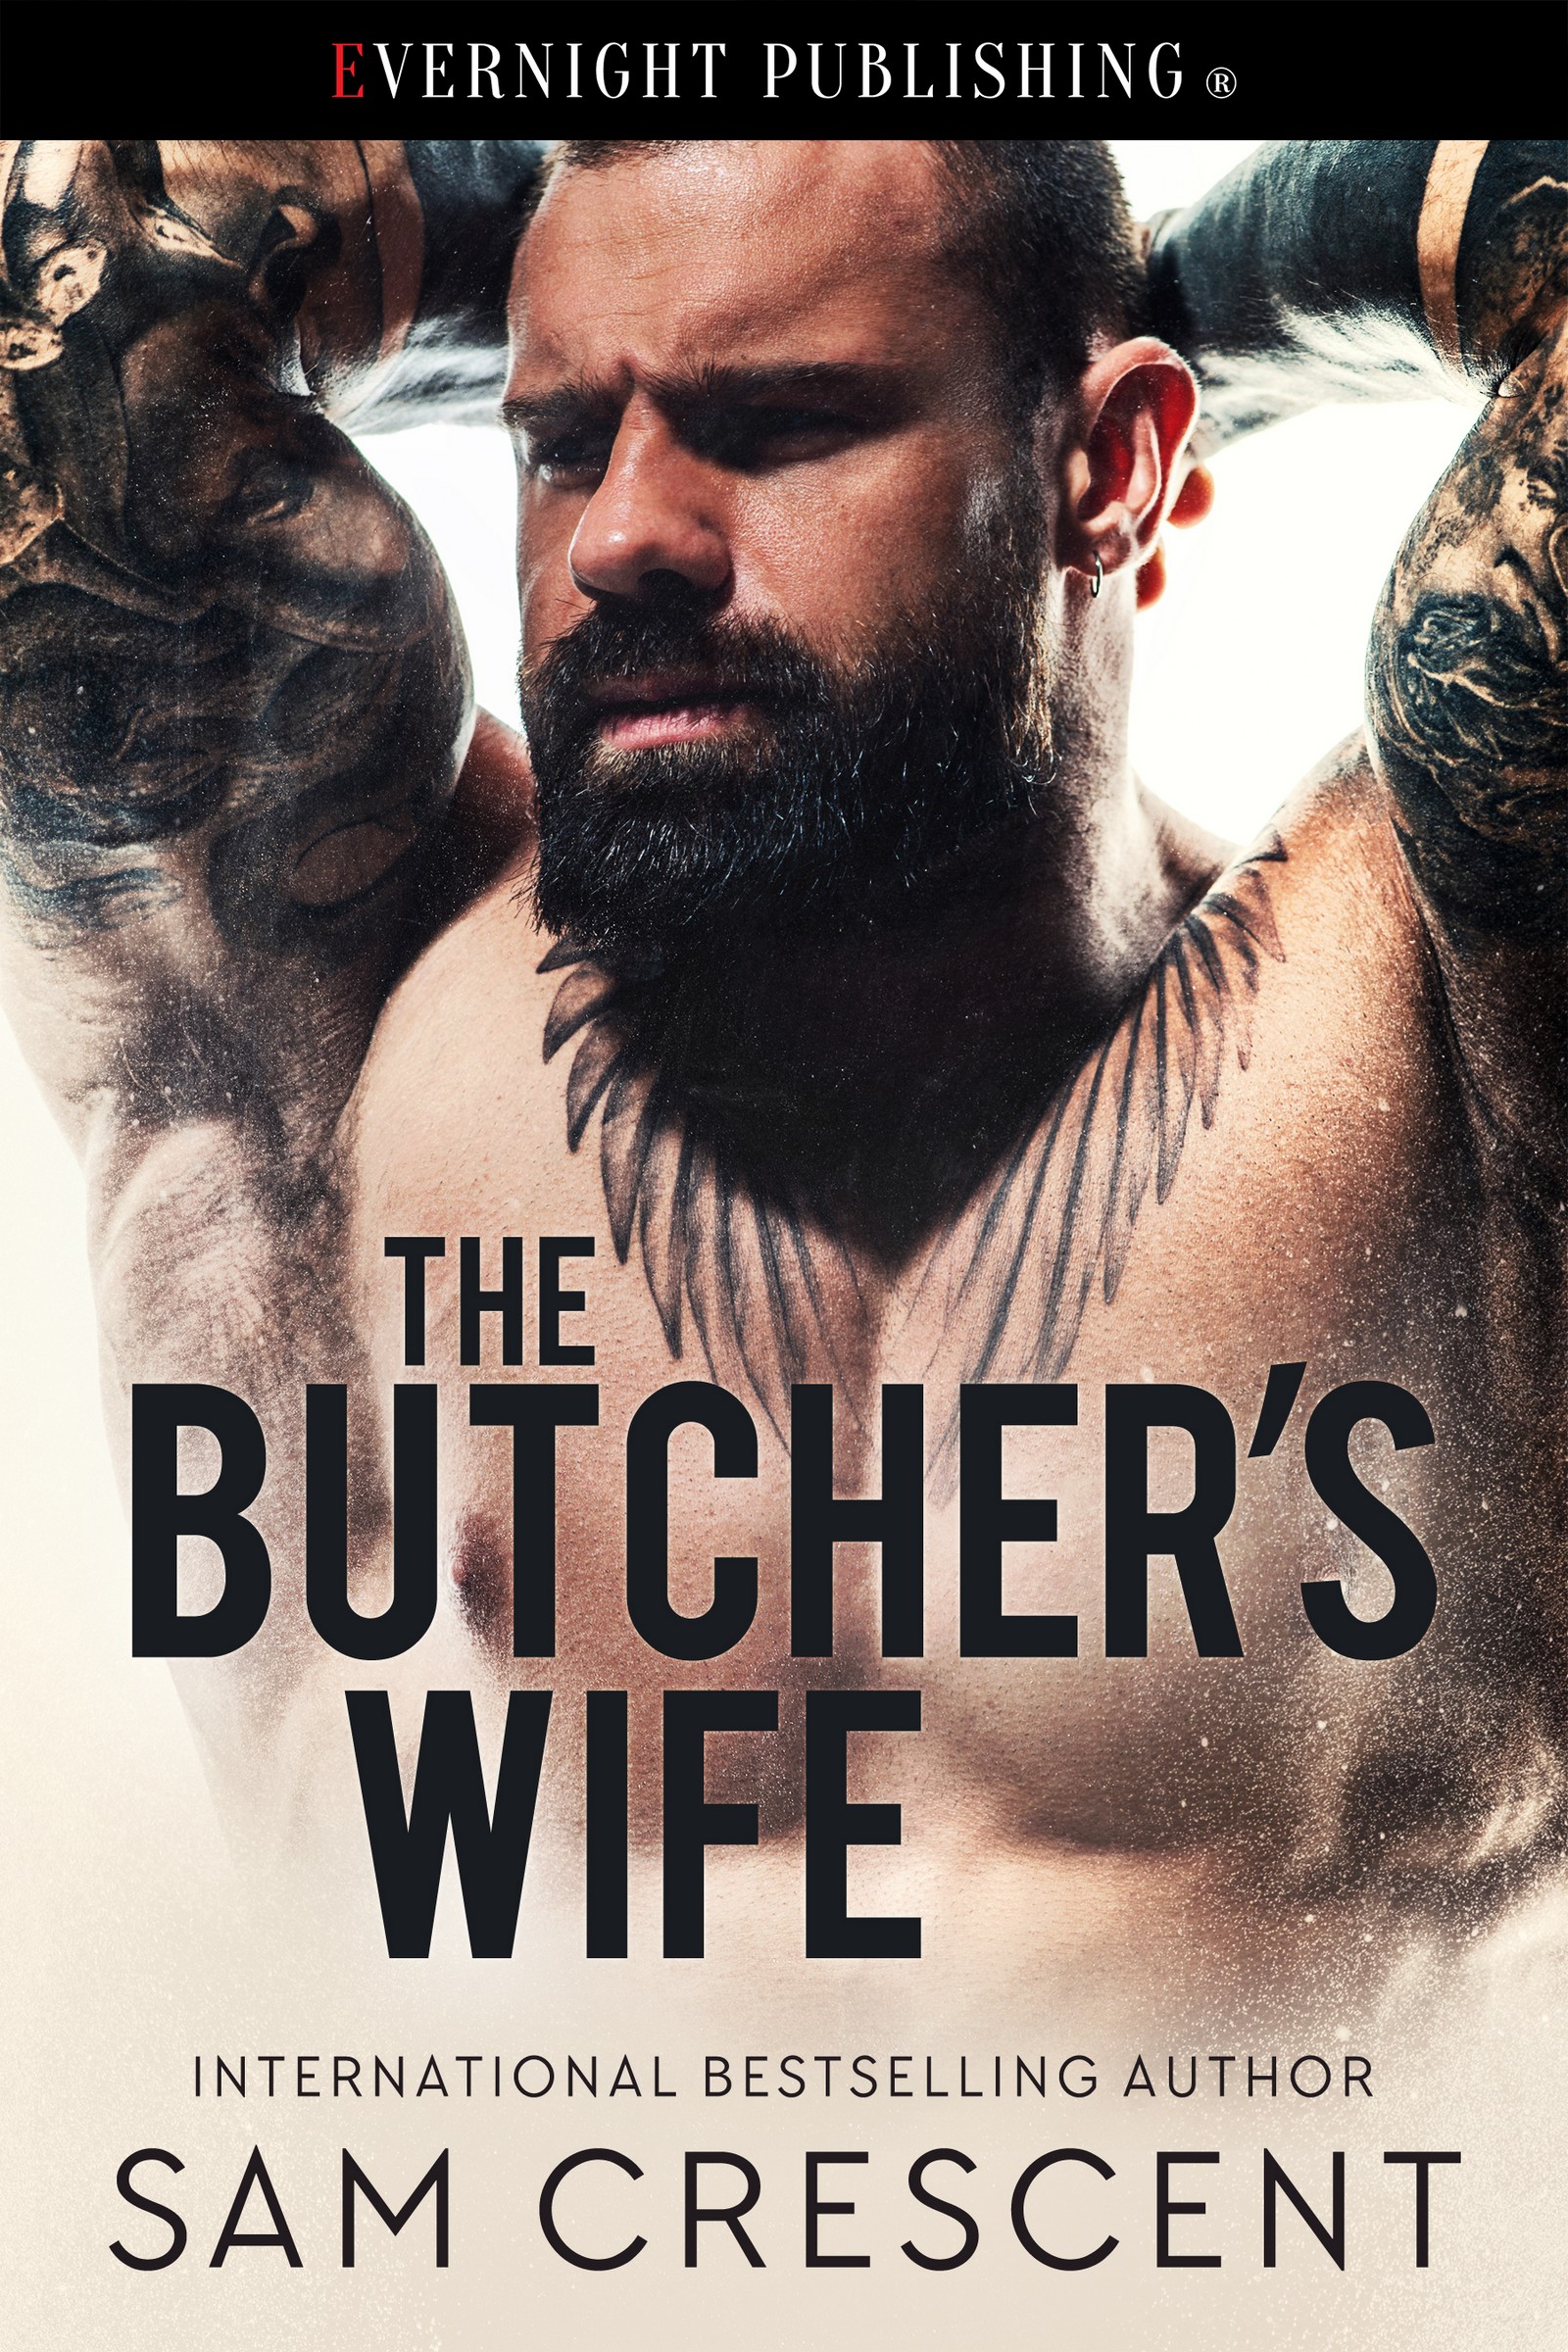 The Butchers Wife by Sam Crescent pic